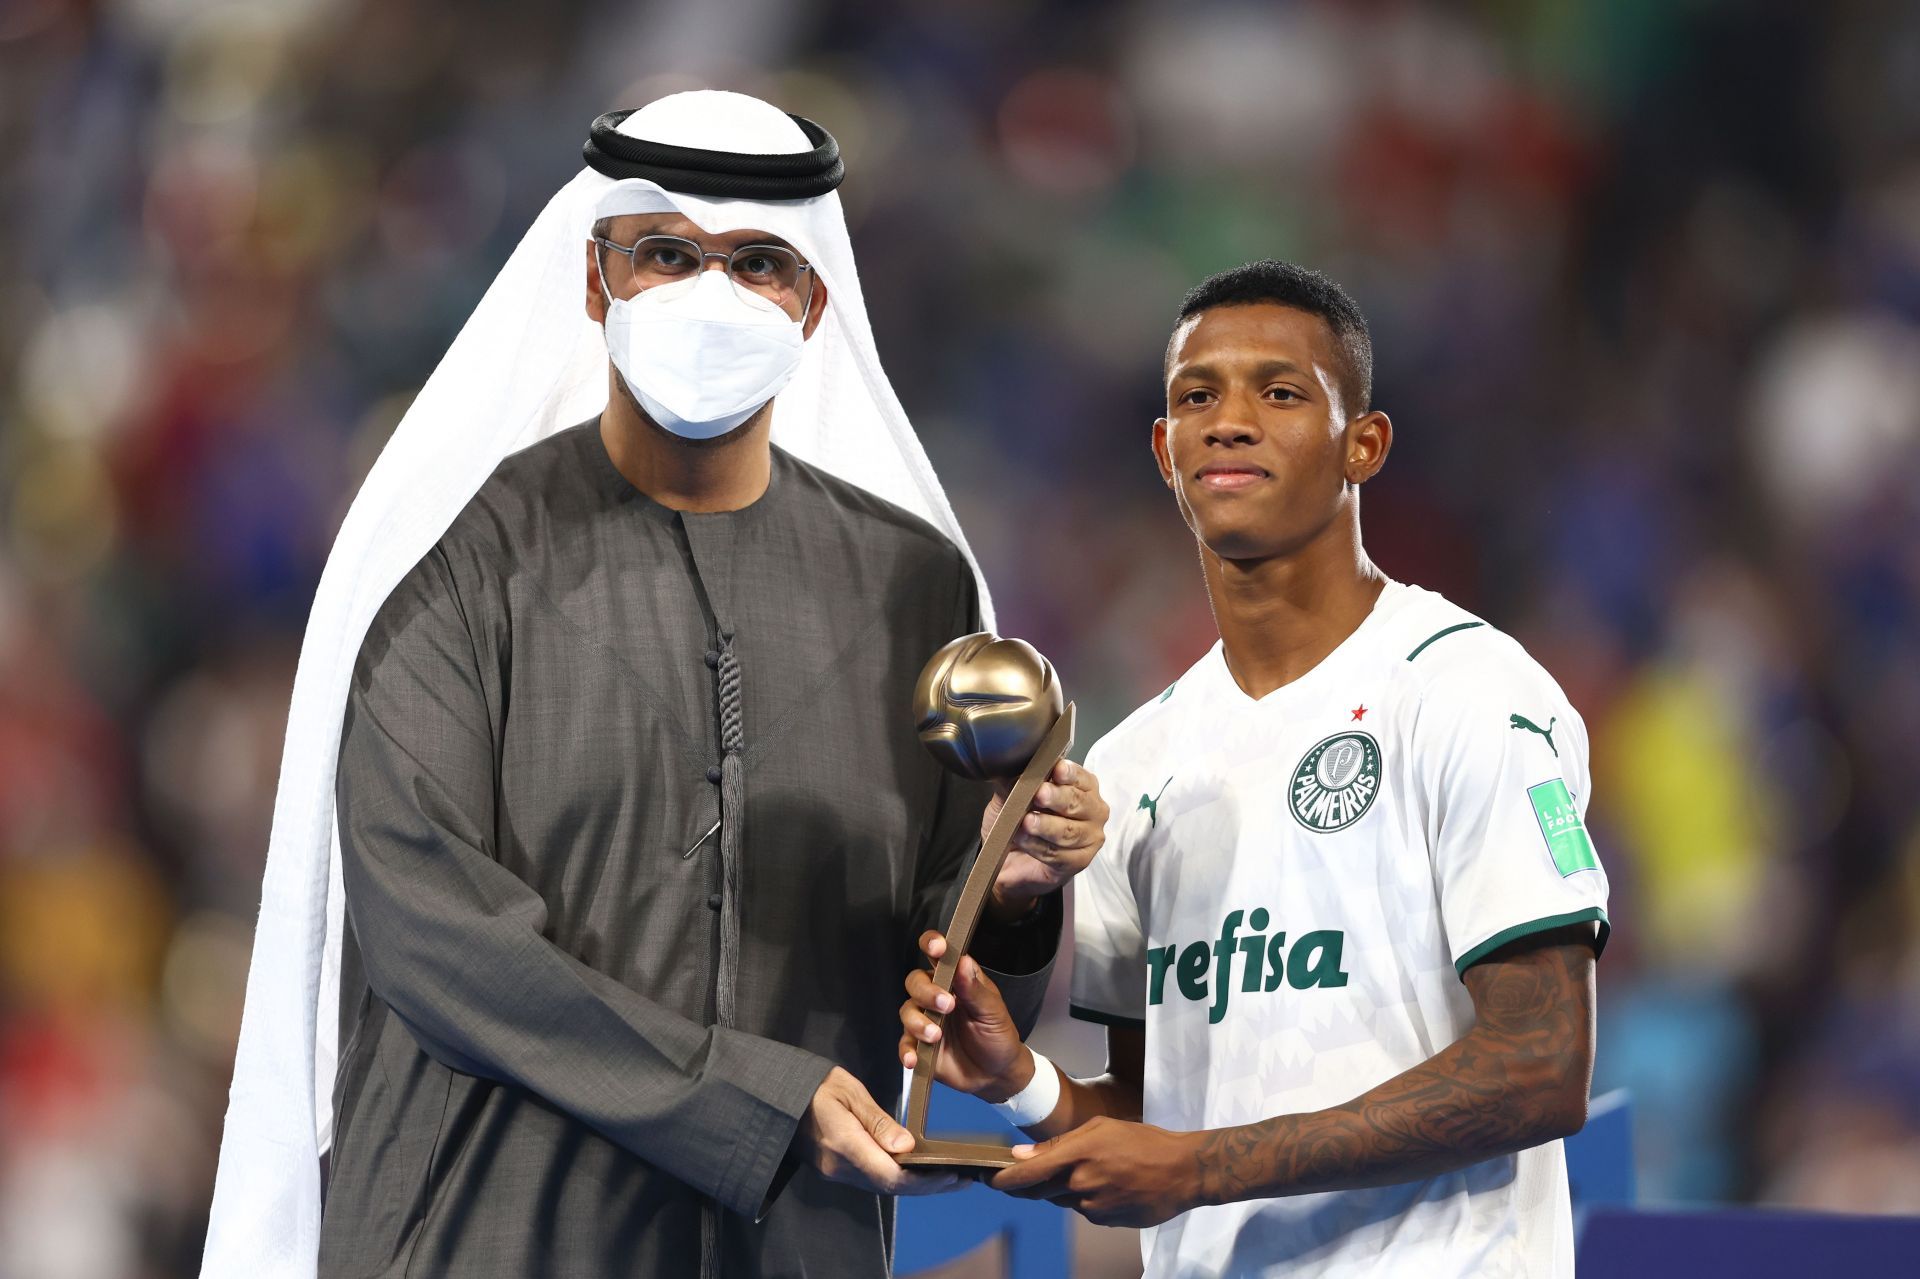 Danilo of Palmeiras is presented with the Adidas Bronze Ball Award after the FIFA Club World Cup UAE 2021 Final match